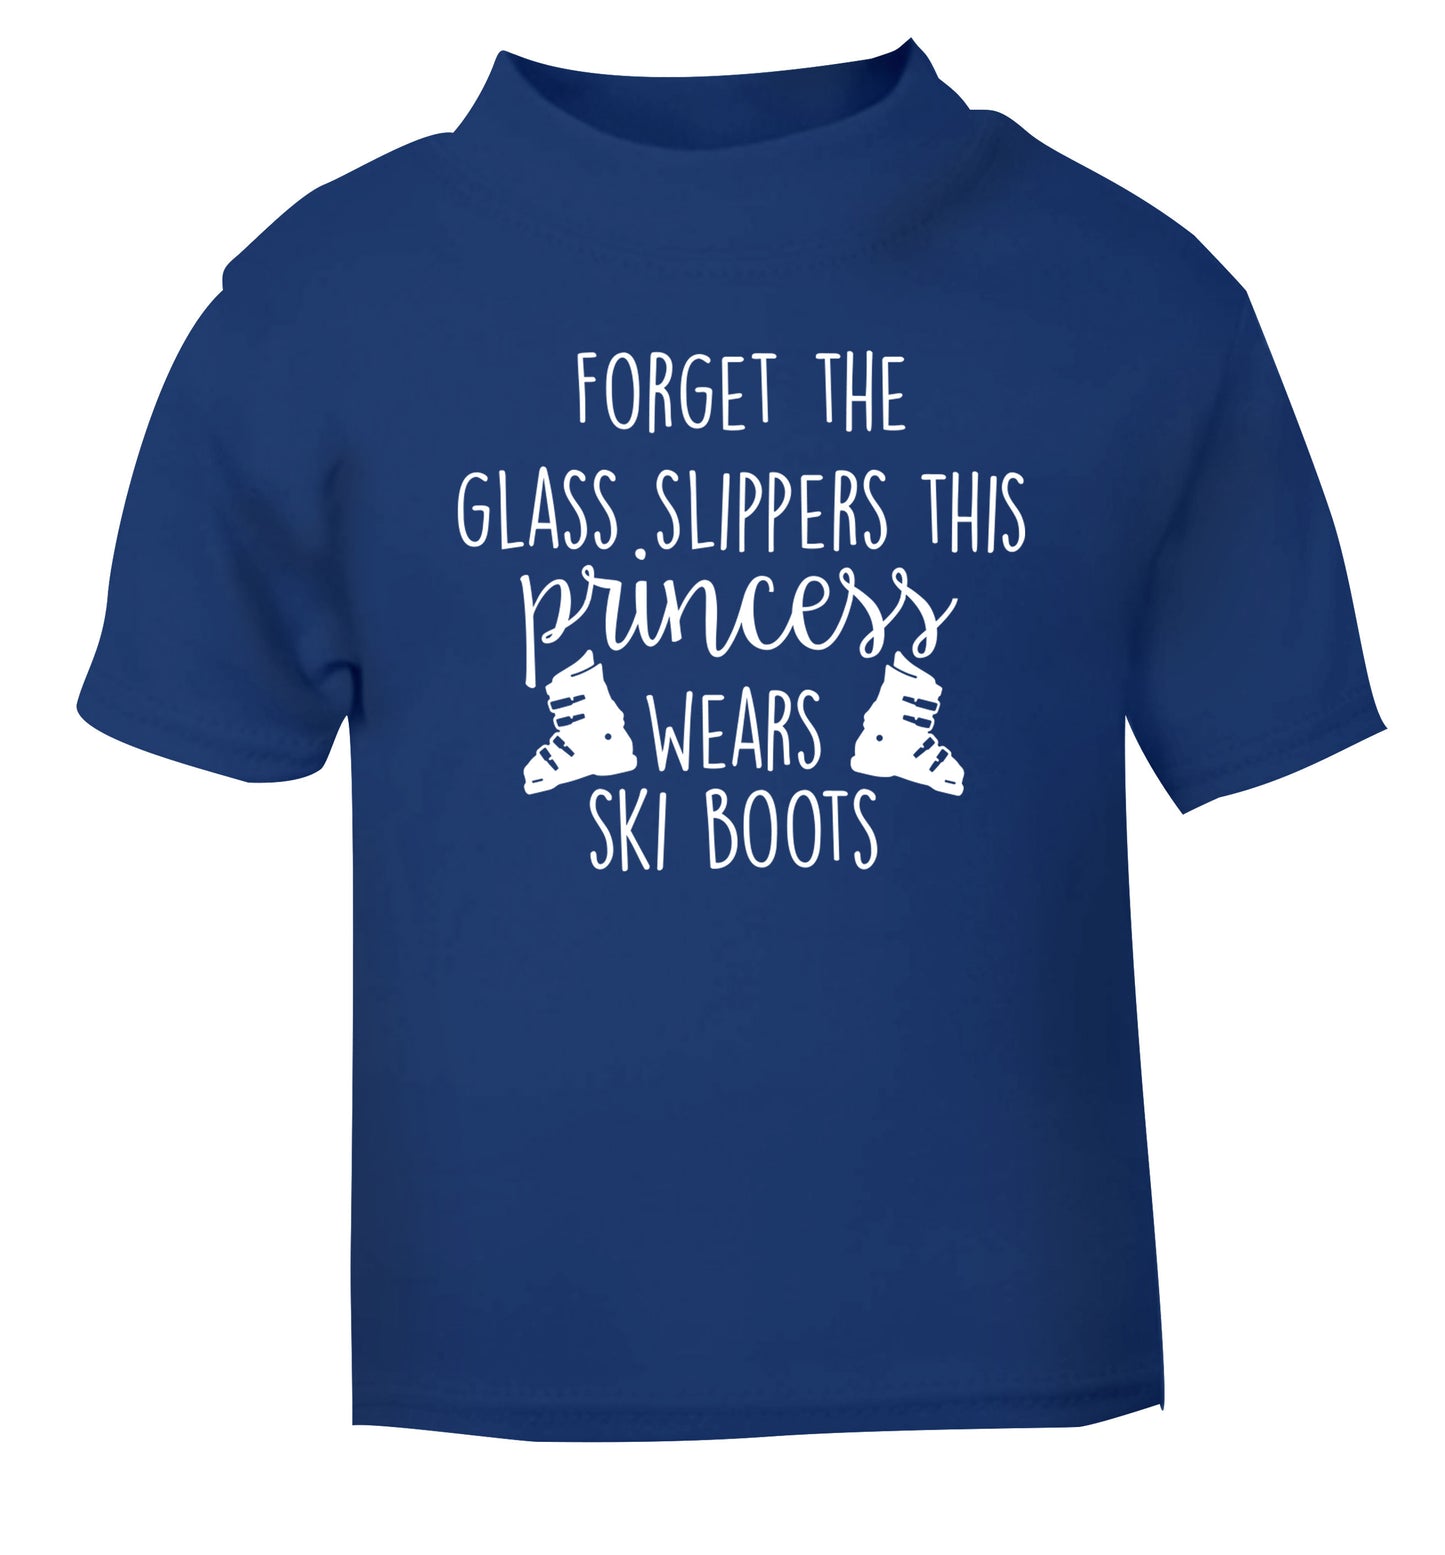 Forget the glass slippers this princess wears ski boots blue Baby Toddler Tshirt 2 Years